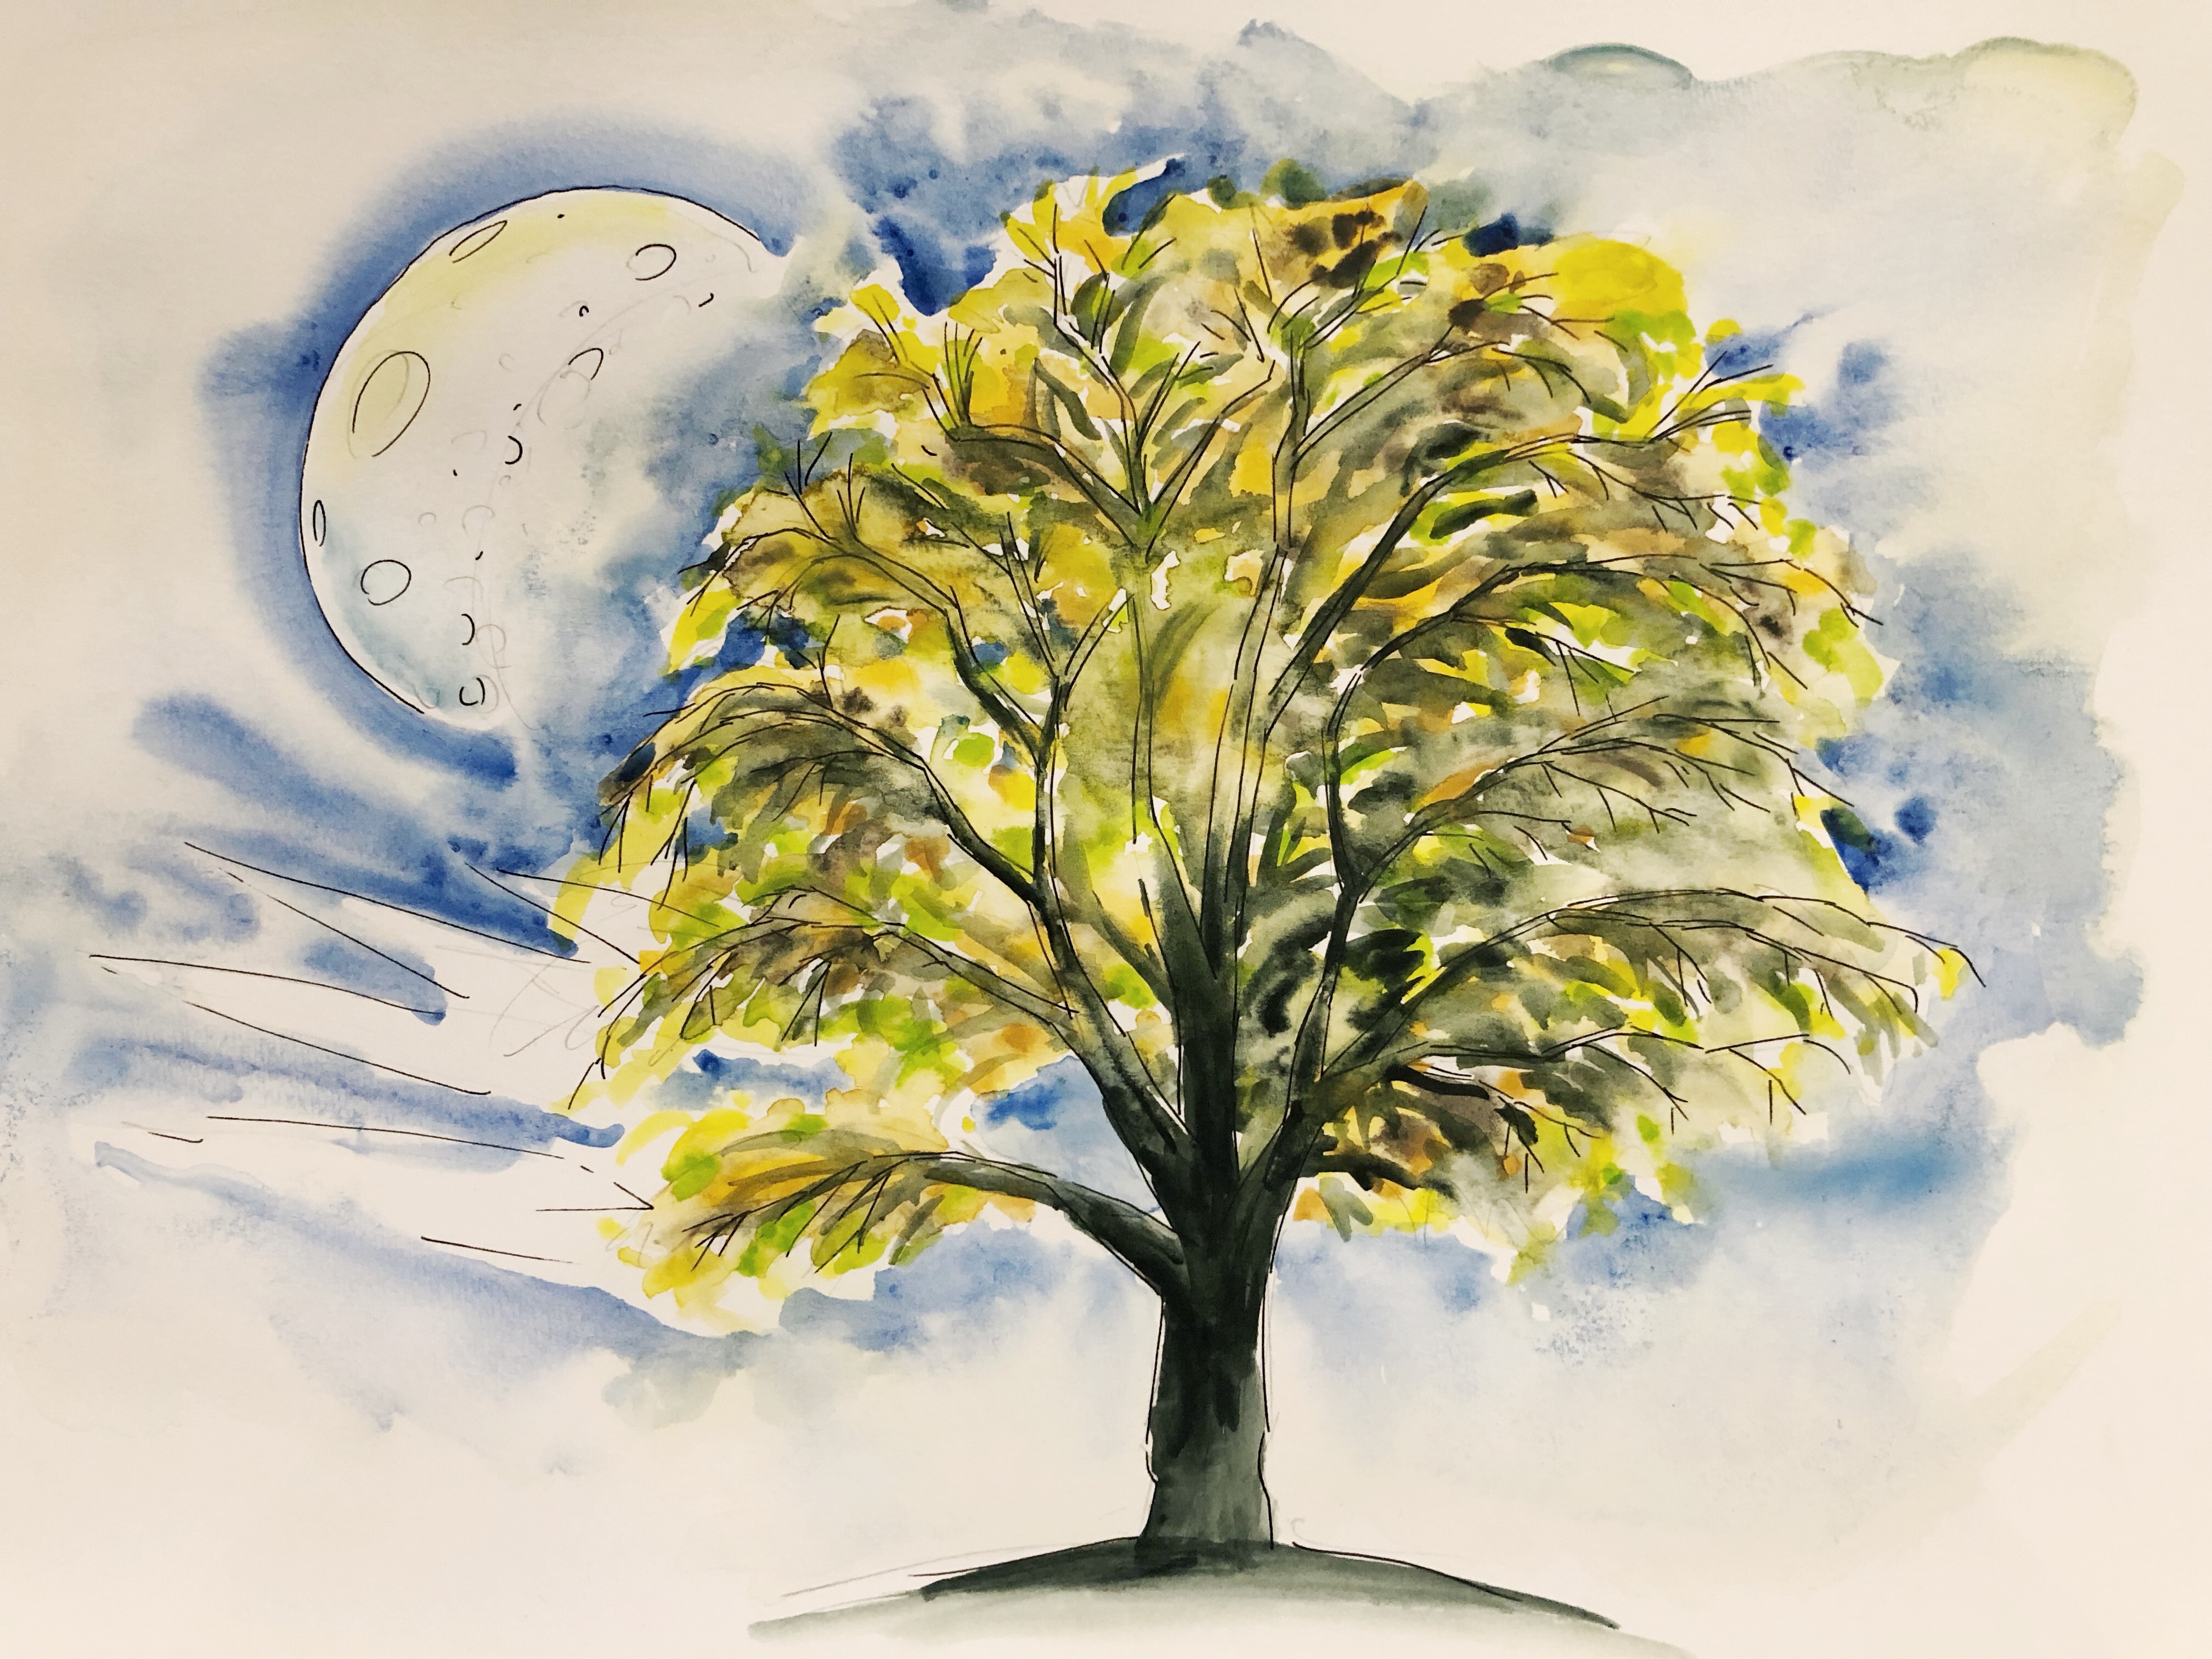 Illustration of a tree with a moon behind it.